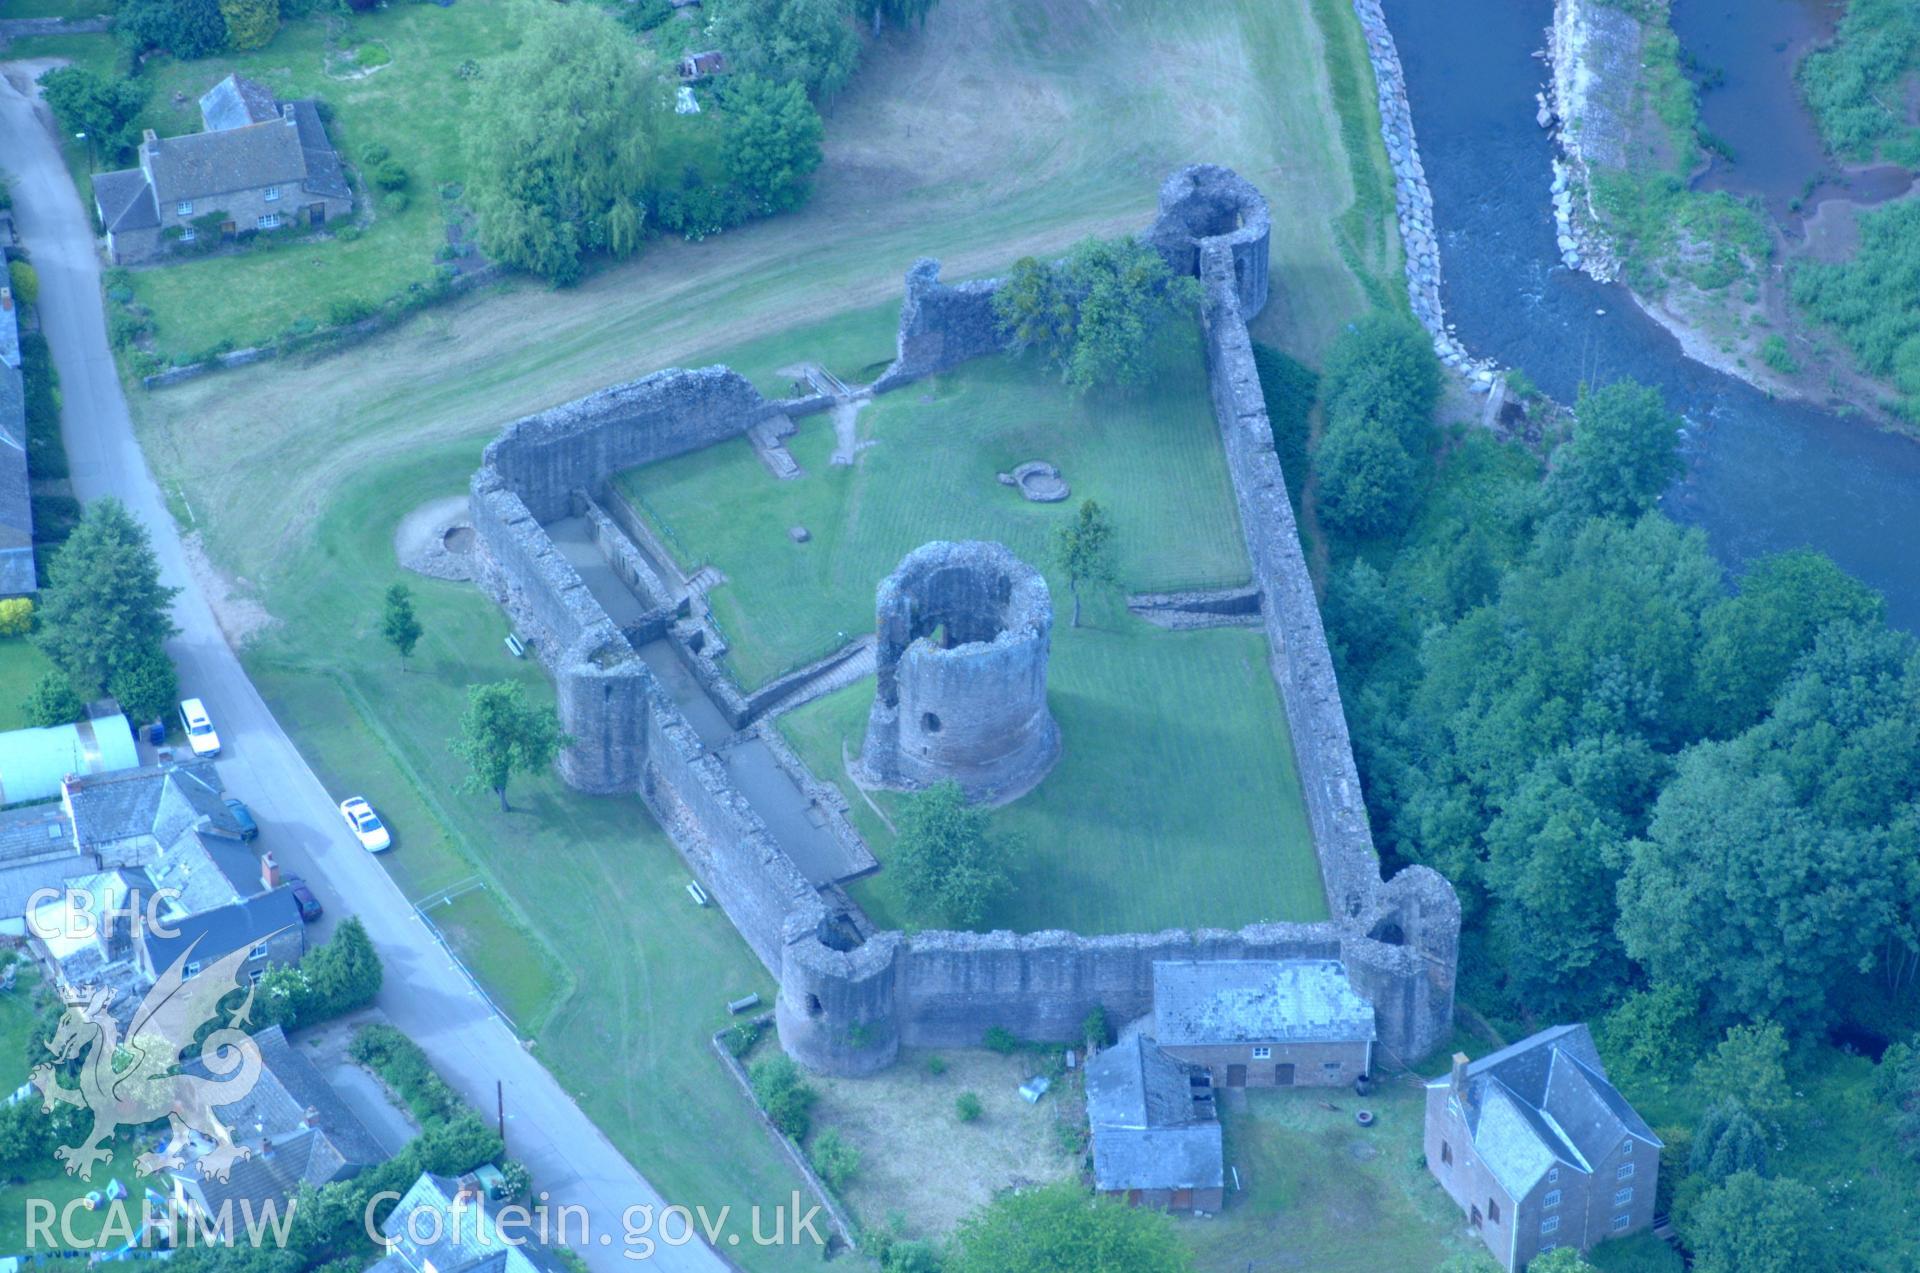 RCAHMW colour oblique aerial photograph of Skenfrith castle taken on 02/06/2004 by Toby Driver